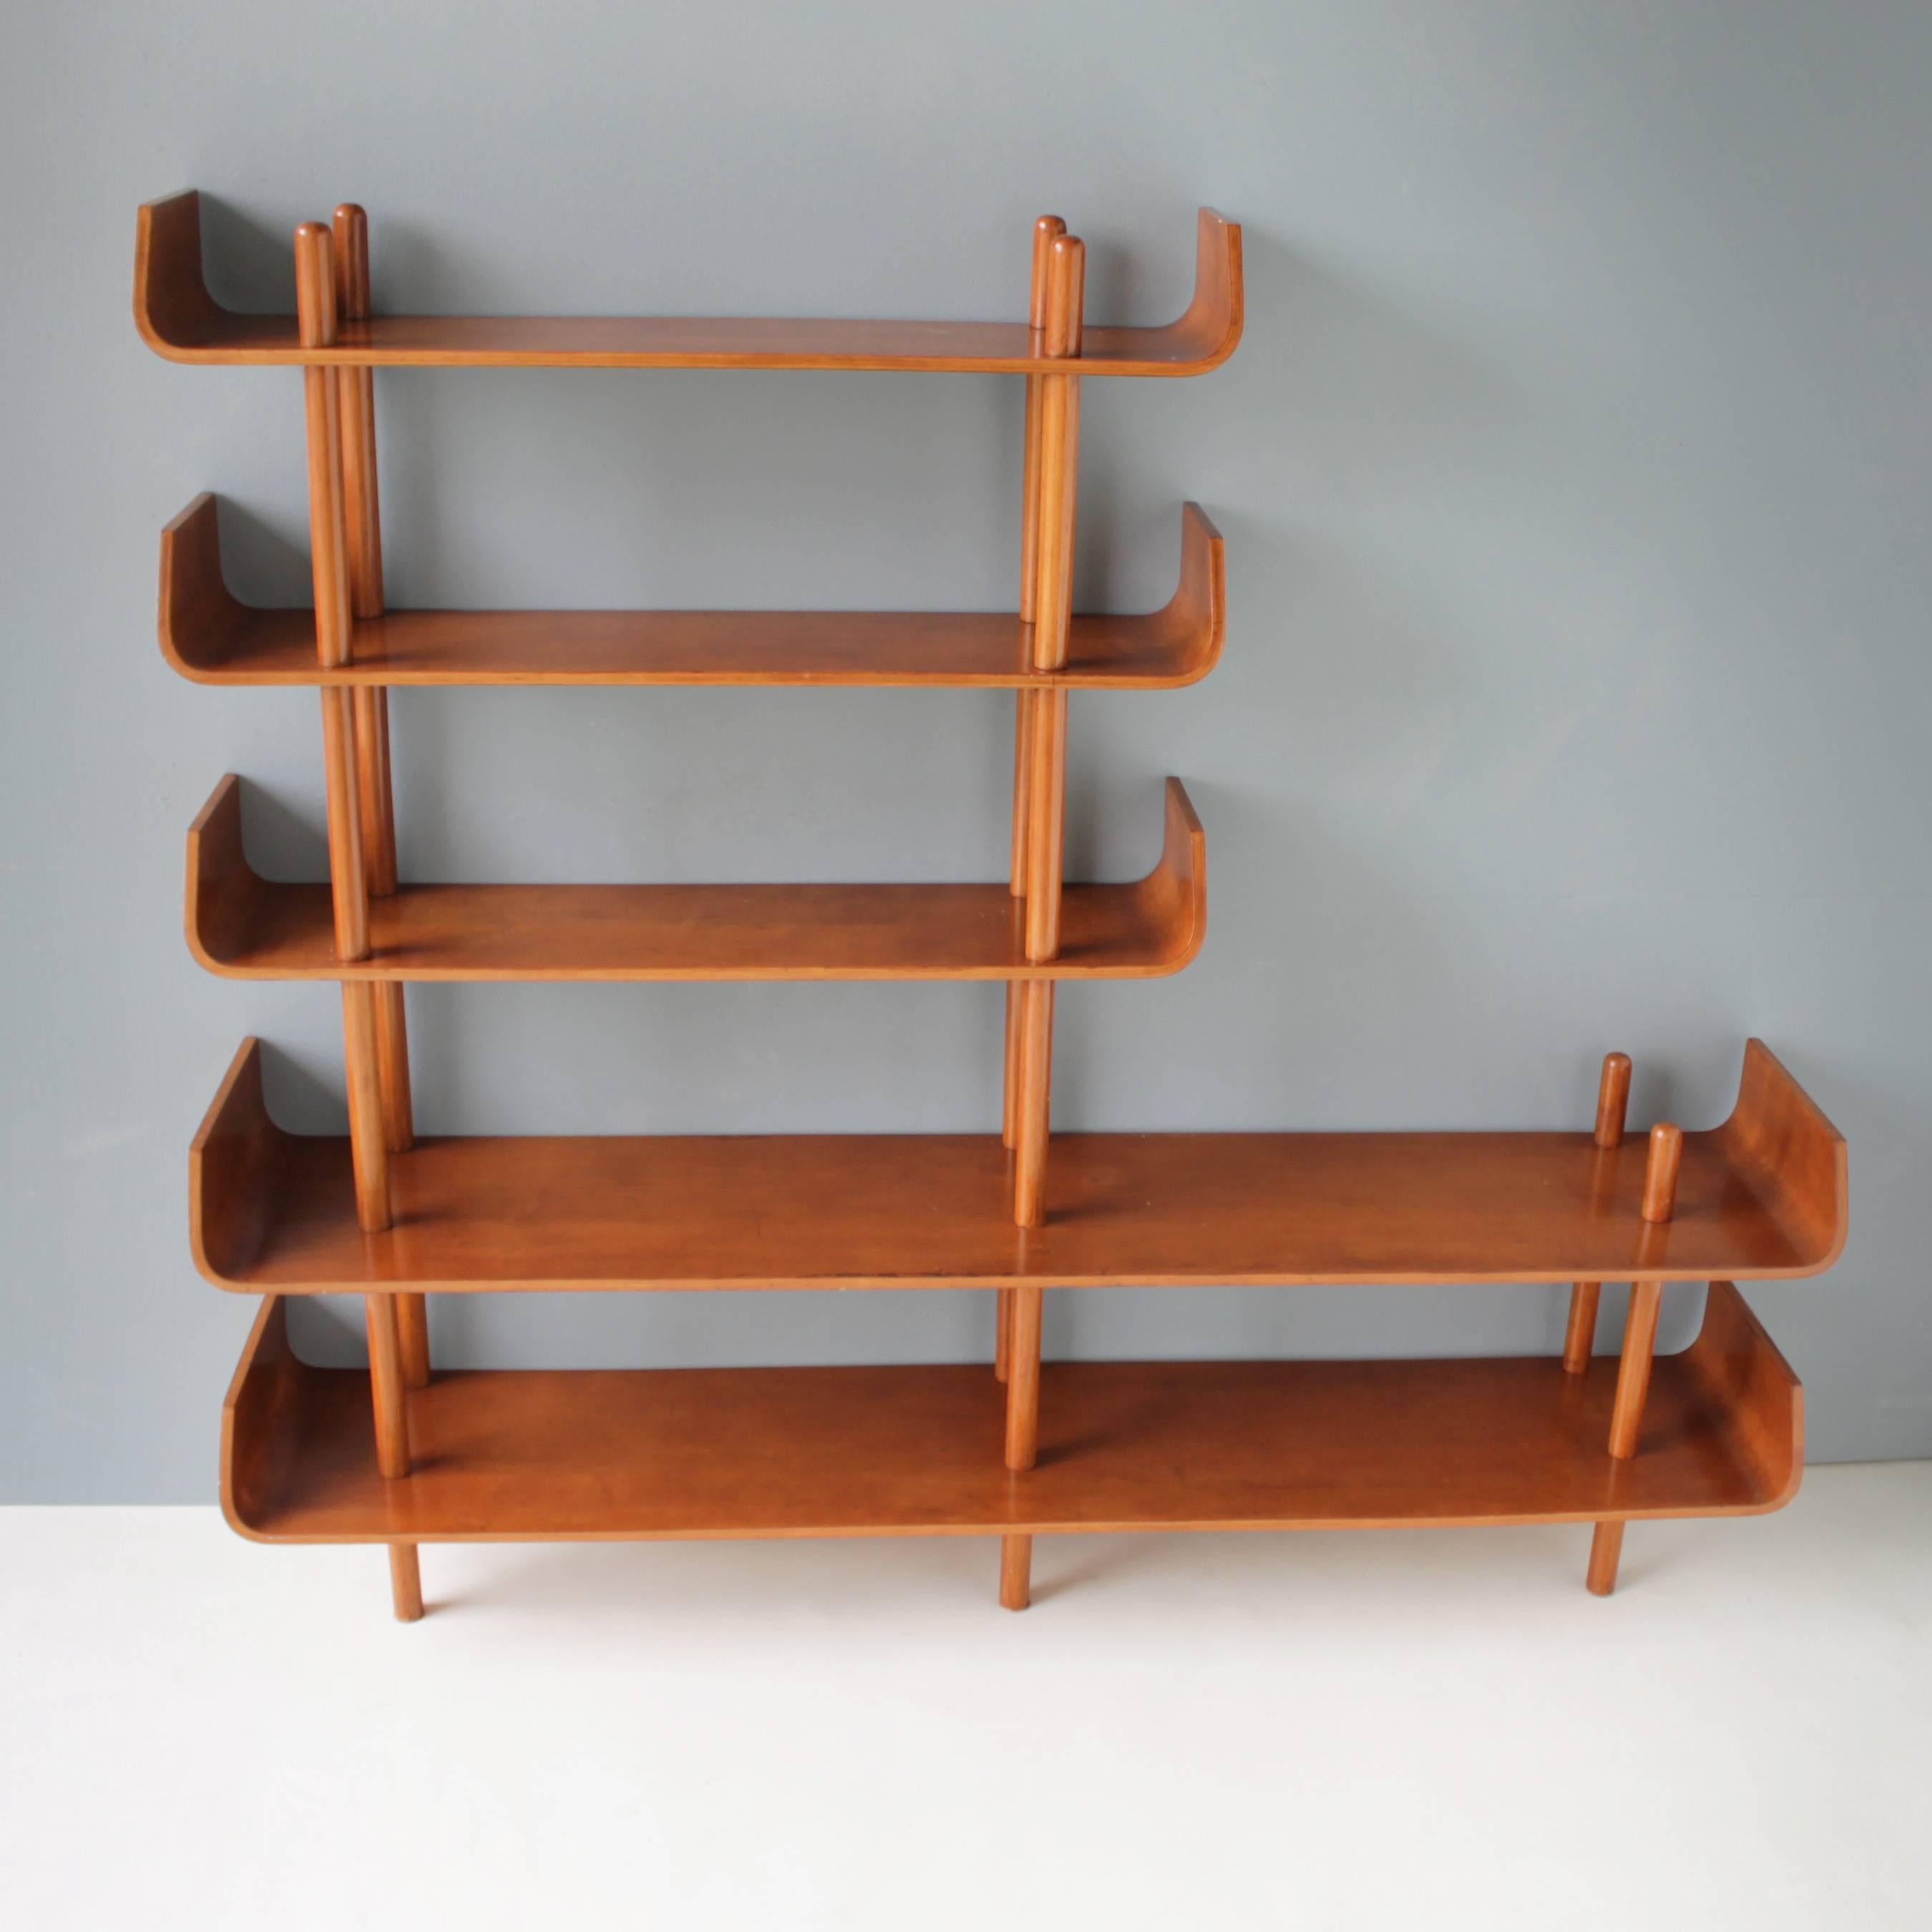 Dutch teak shelving unit by Willem Lutjens for Gouda Den Boer. Birch wooden stands and teak plywood shelves, can be used as a room divider or a bookcase.
Dimensions: Length of the two large shelves 59.0 in. (150 cm), depth 11.5 in. (29,3 cm).